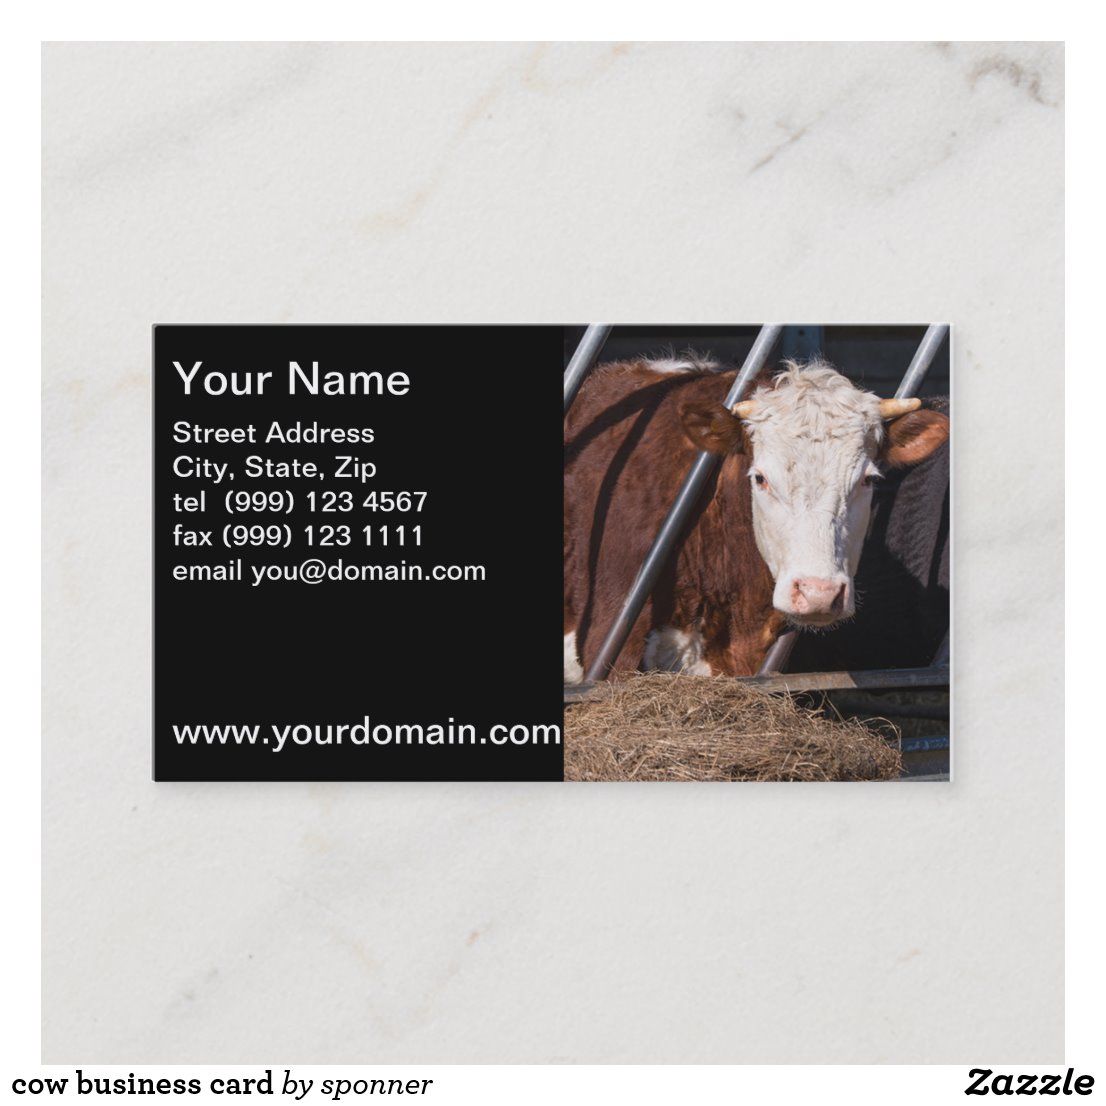 cow business cards 1